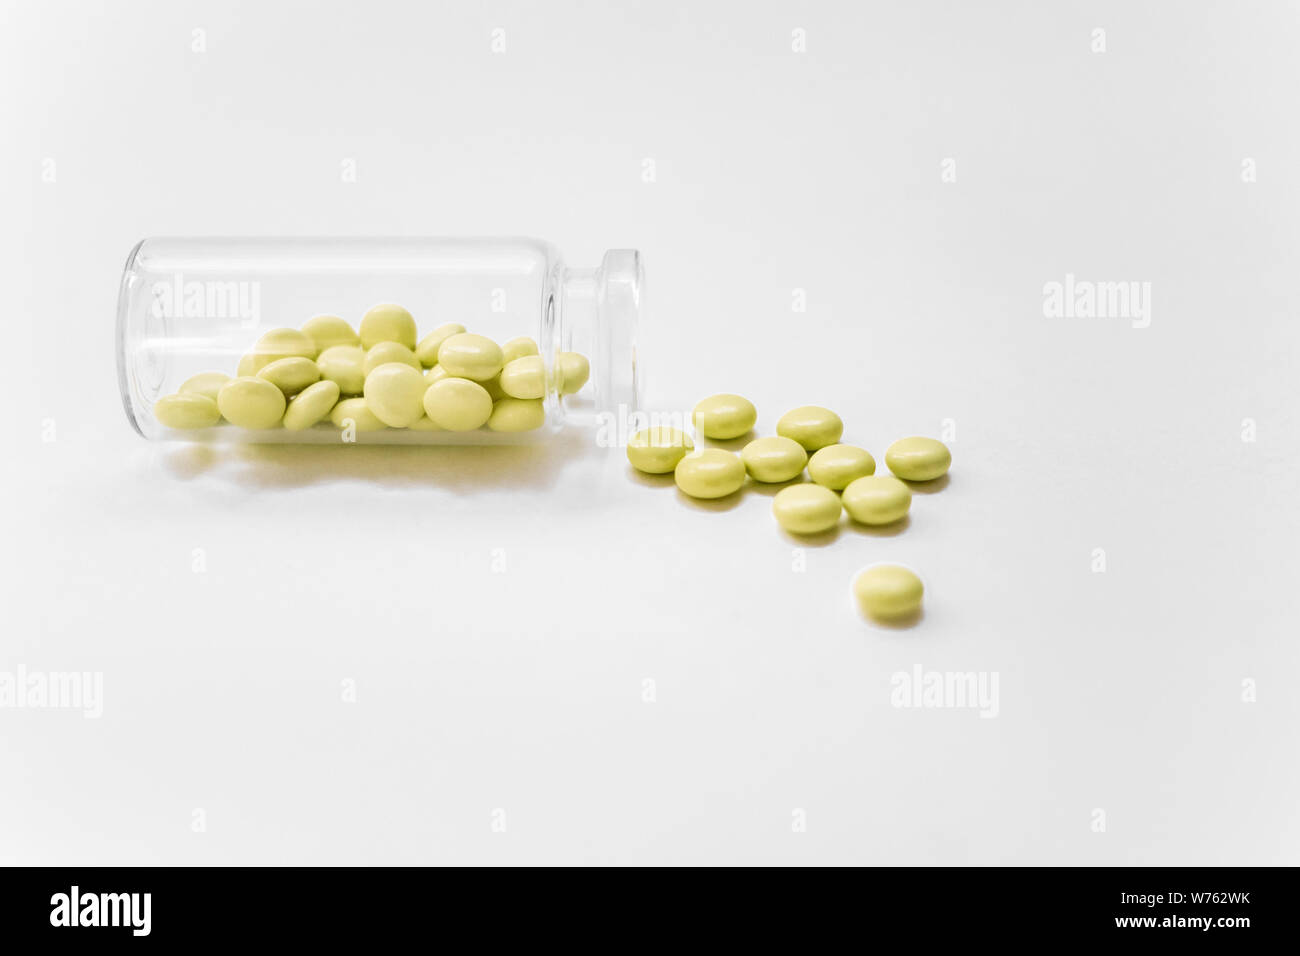 Download Yellow Pill Bottle High Resolution Stock Photography And Images Alamy Yellowimages Mockups